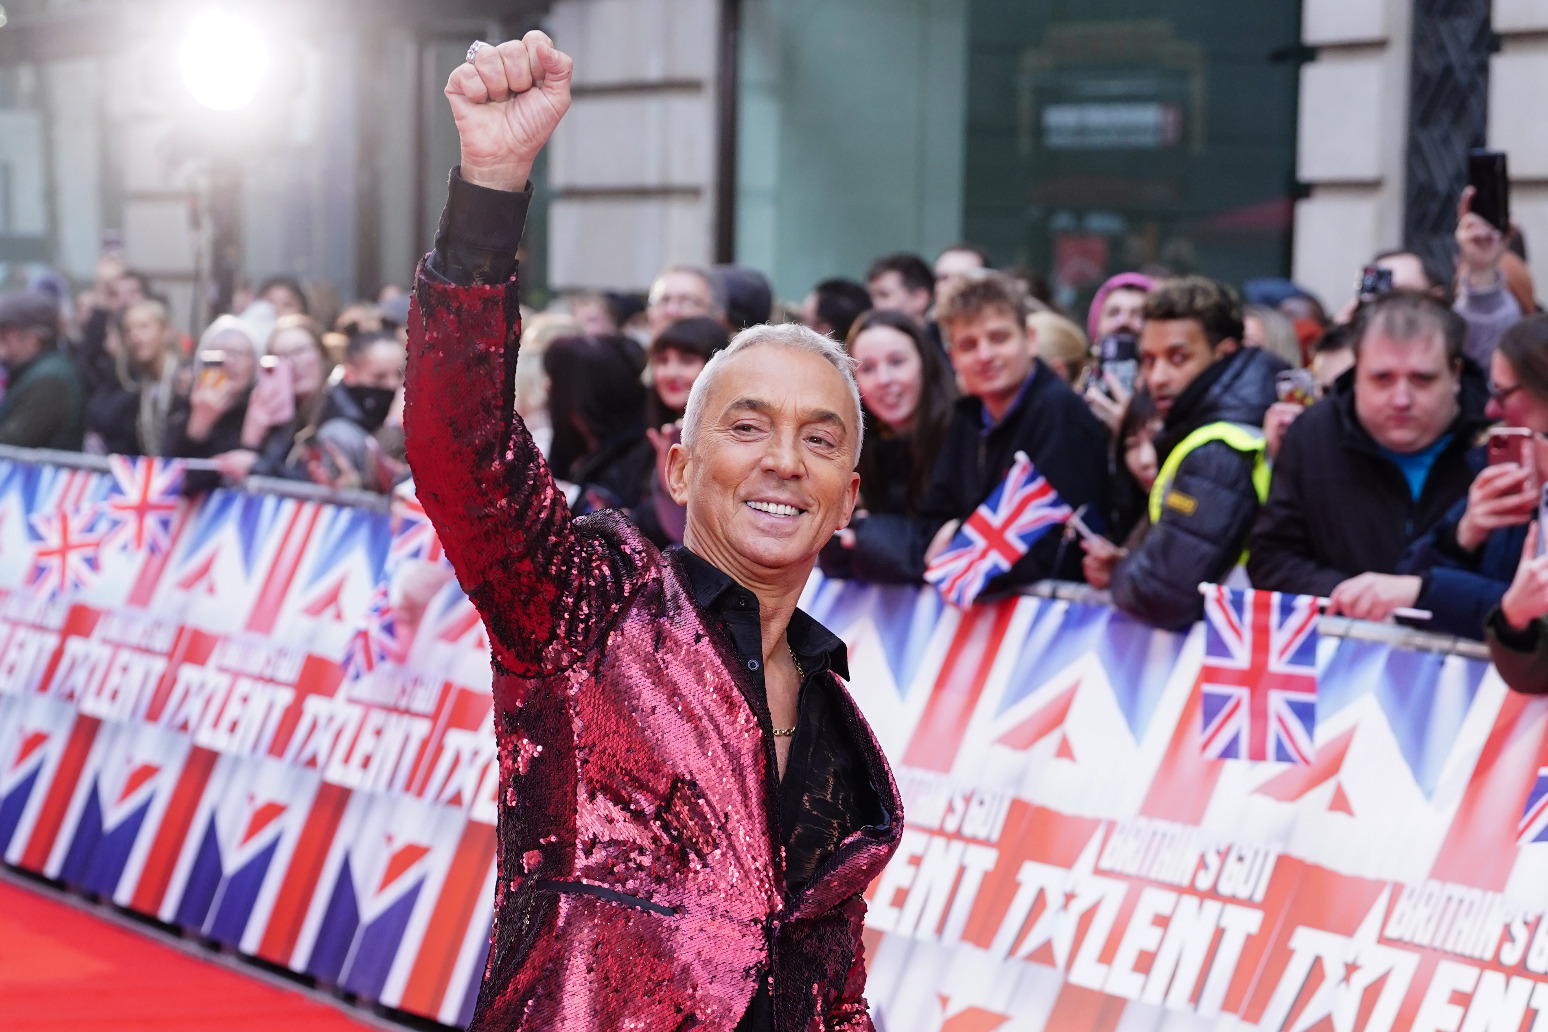 Bruno Tonioli blows kiss to fans as he arrives at Britains Got Talent auditions